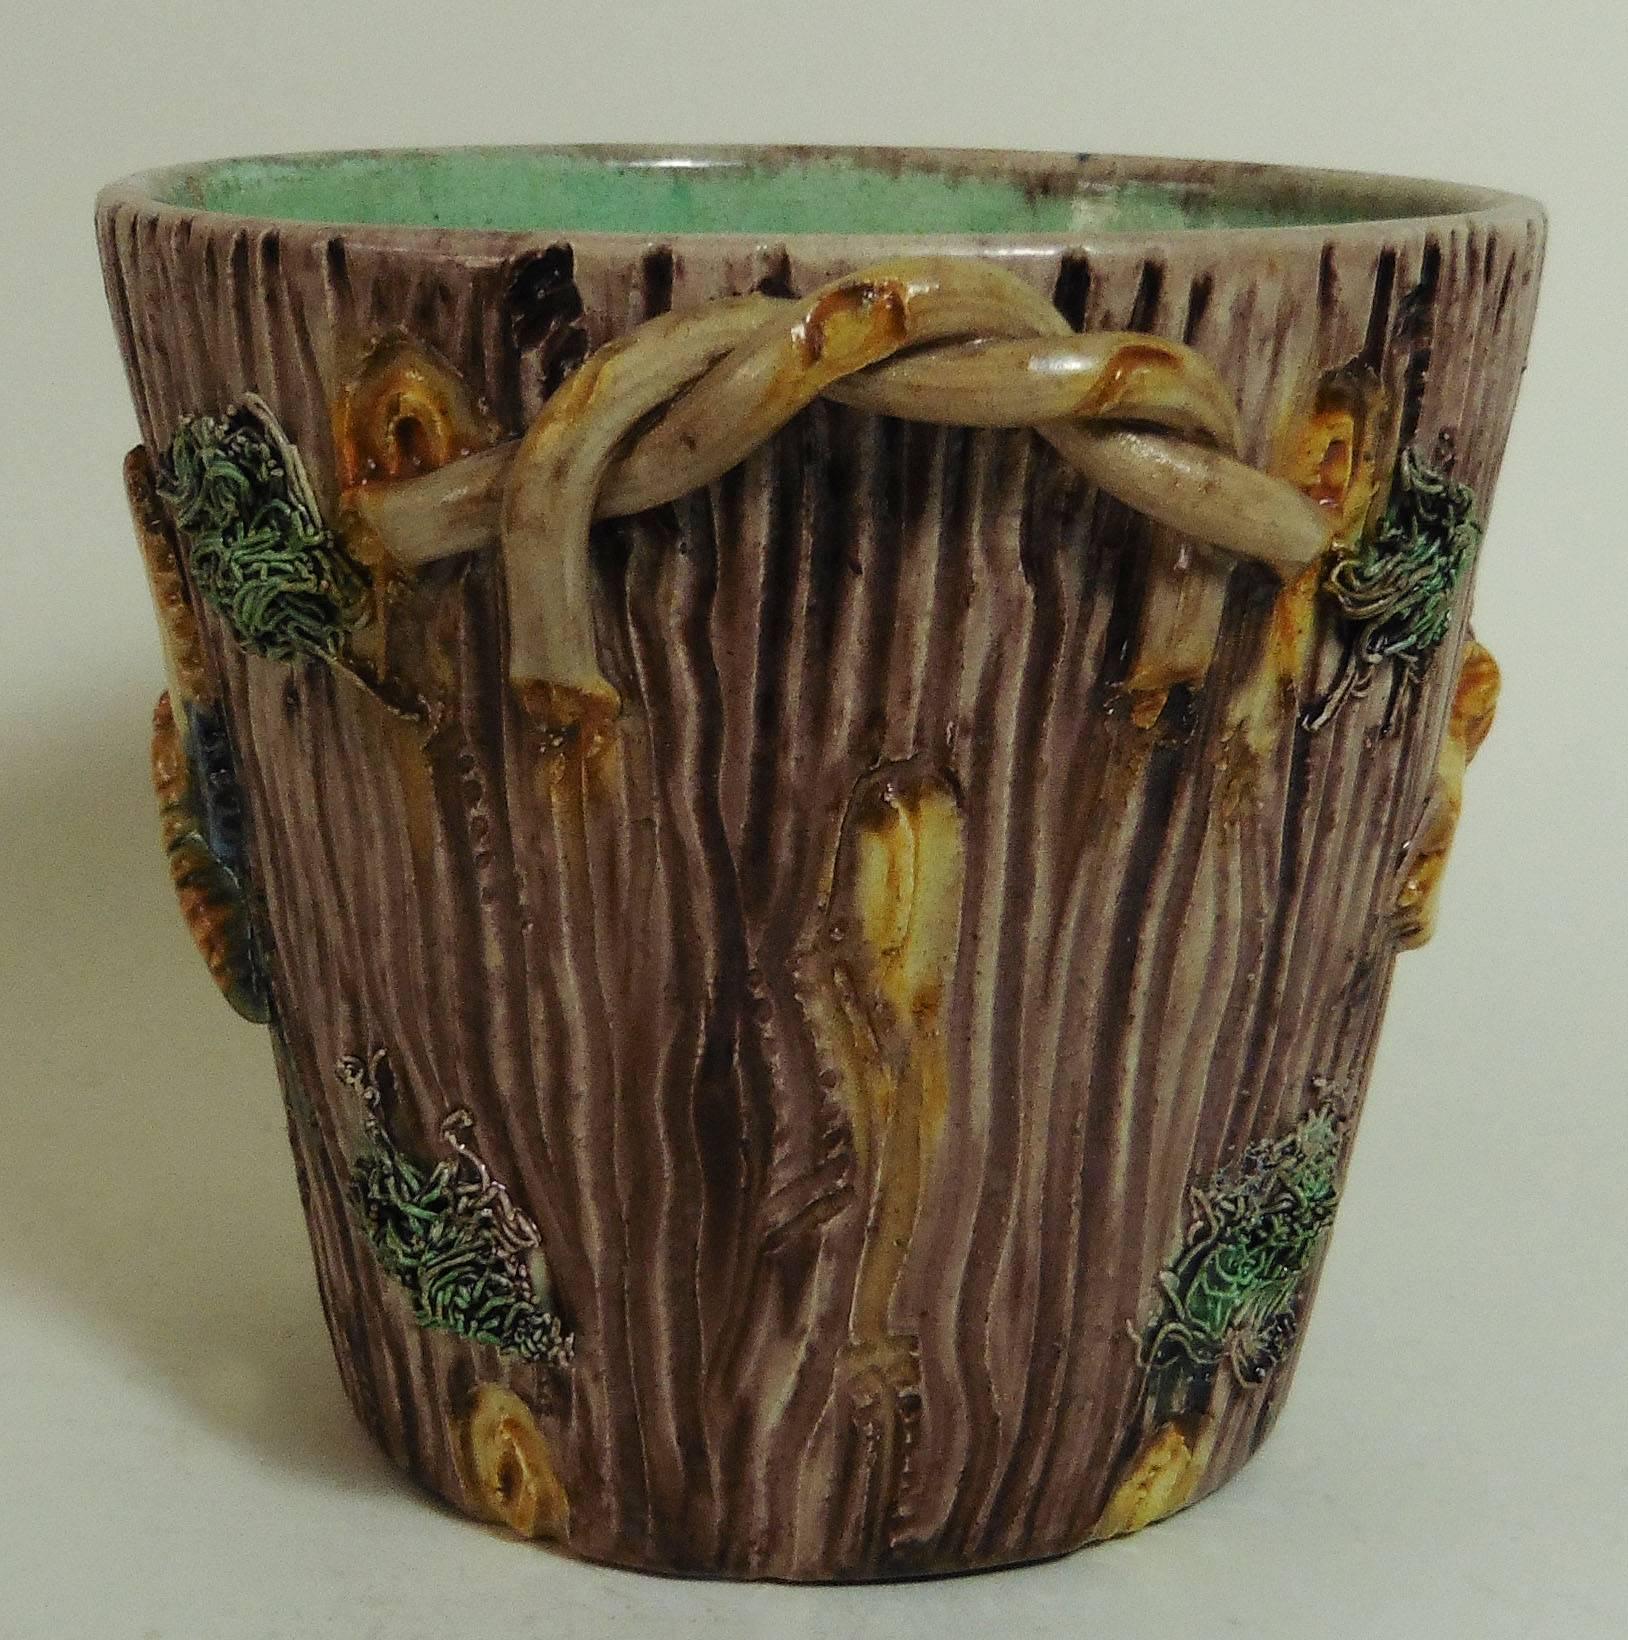 Palissy Trompe l 'oeil wood trunk cache pot decorated with large butterflies, the handles are interlaced twigs signed Thomas Sergent, circa 1880.
Thomas Victor Sergent was an active member of the School of Paris with others ceramists he made